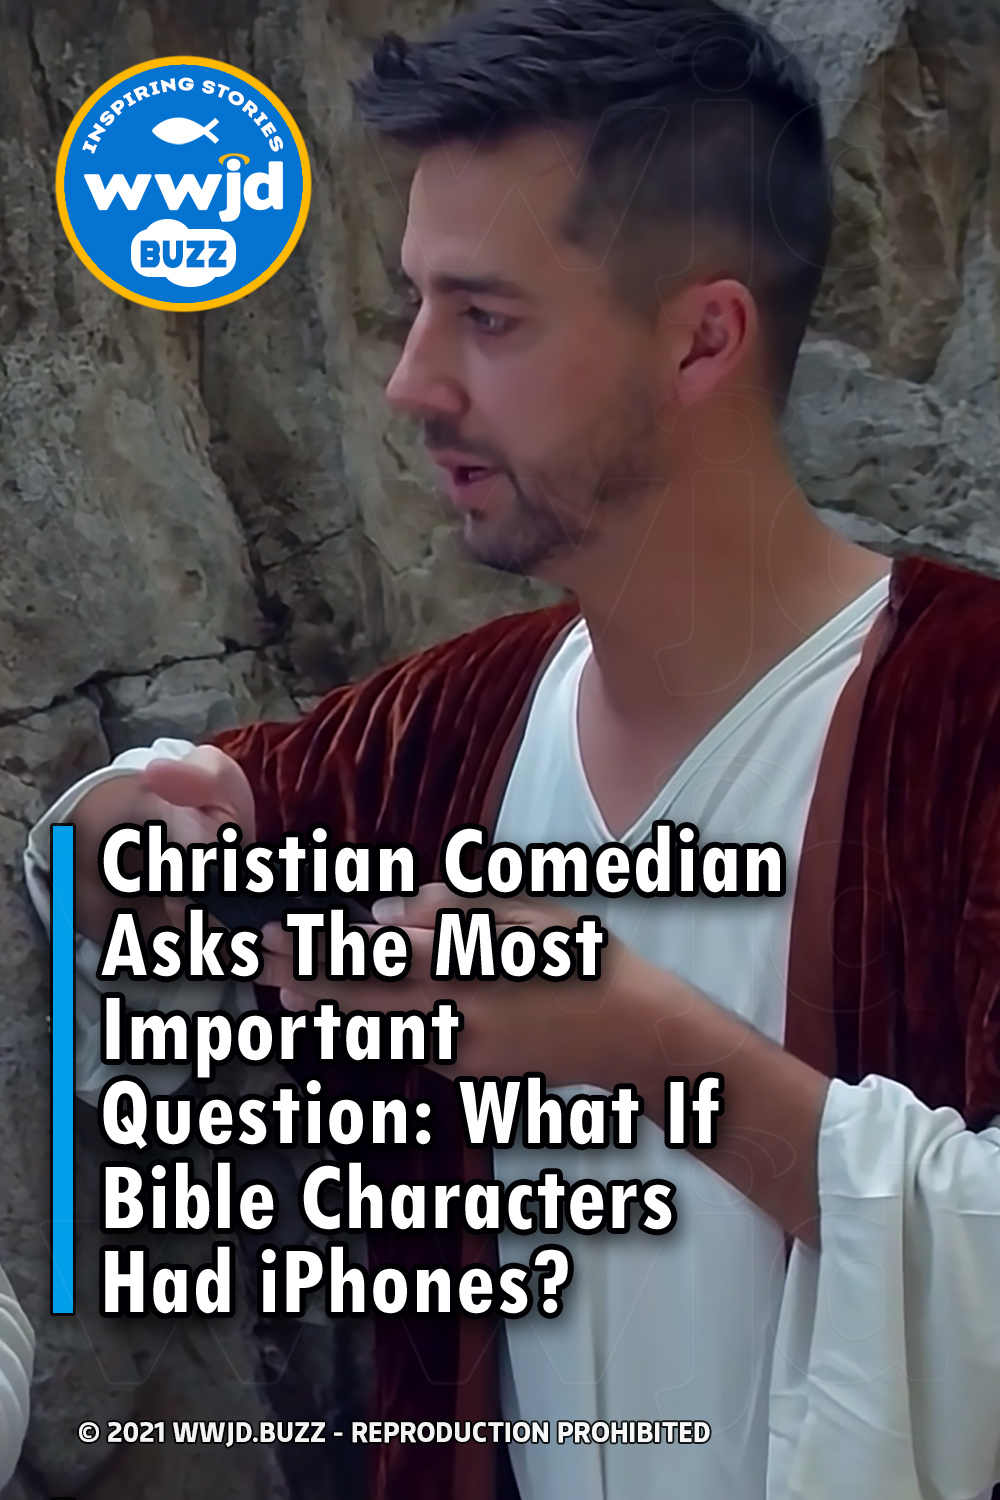 Christian Comedian Asks The Most Important Question: What If Bible Characters Had iPhones?